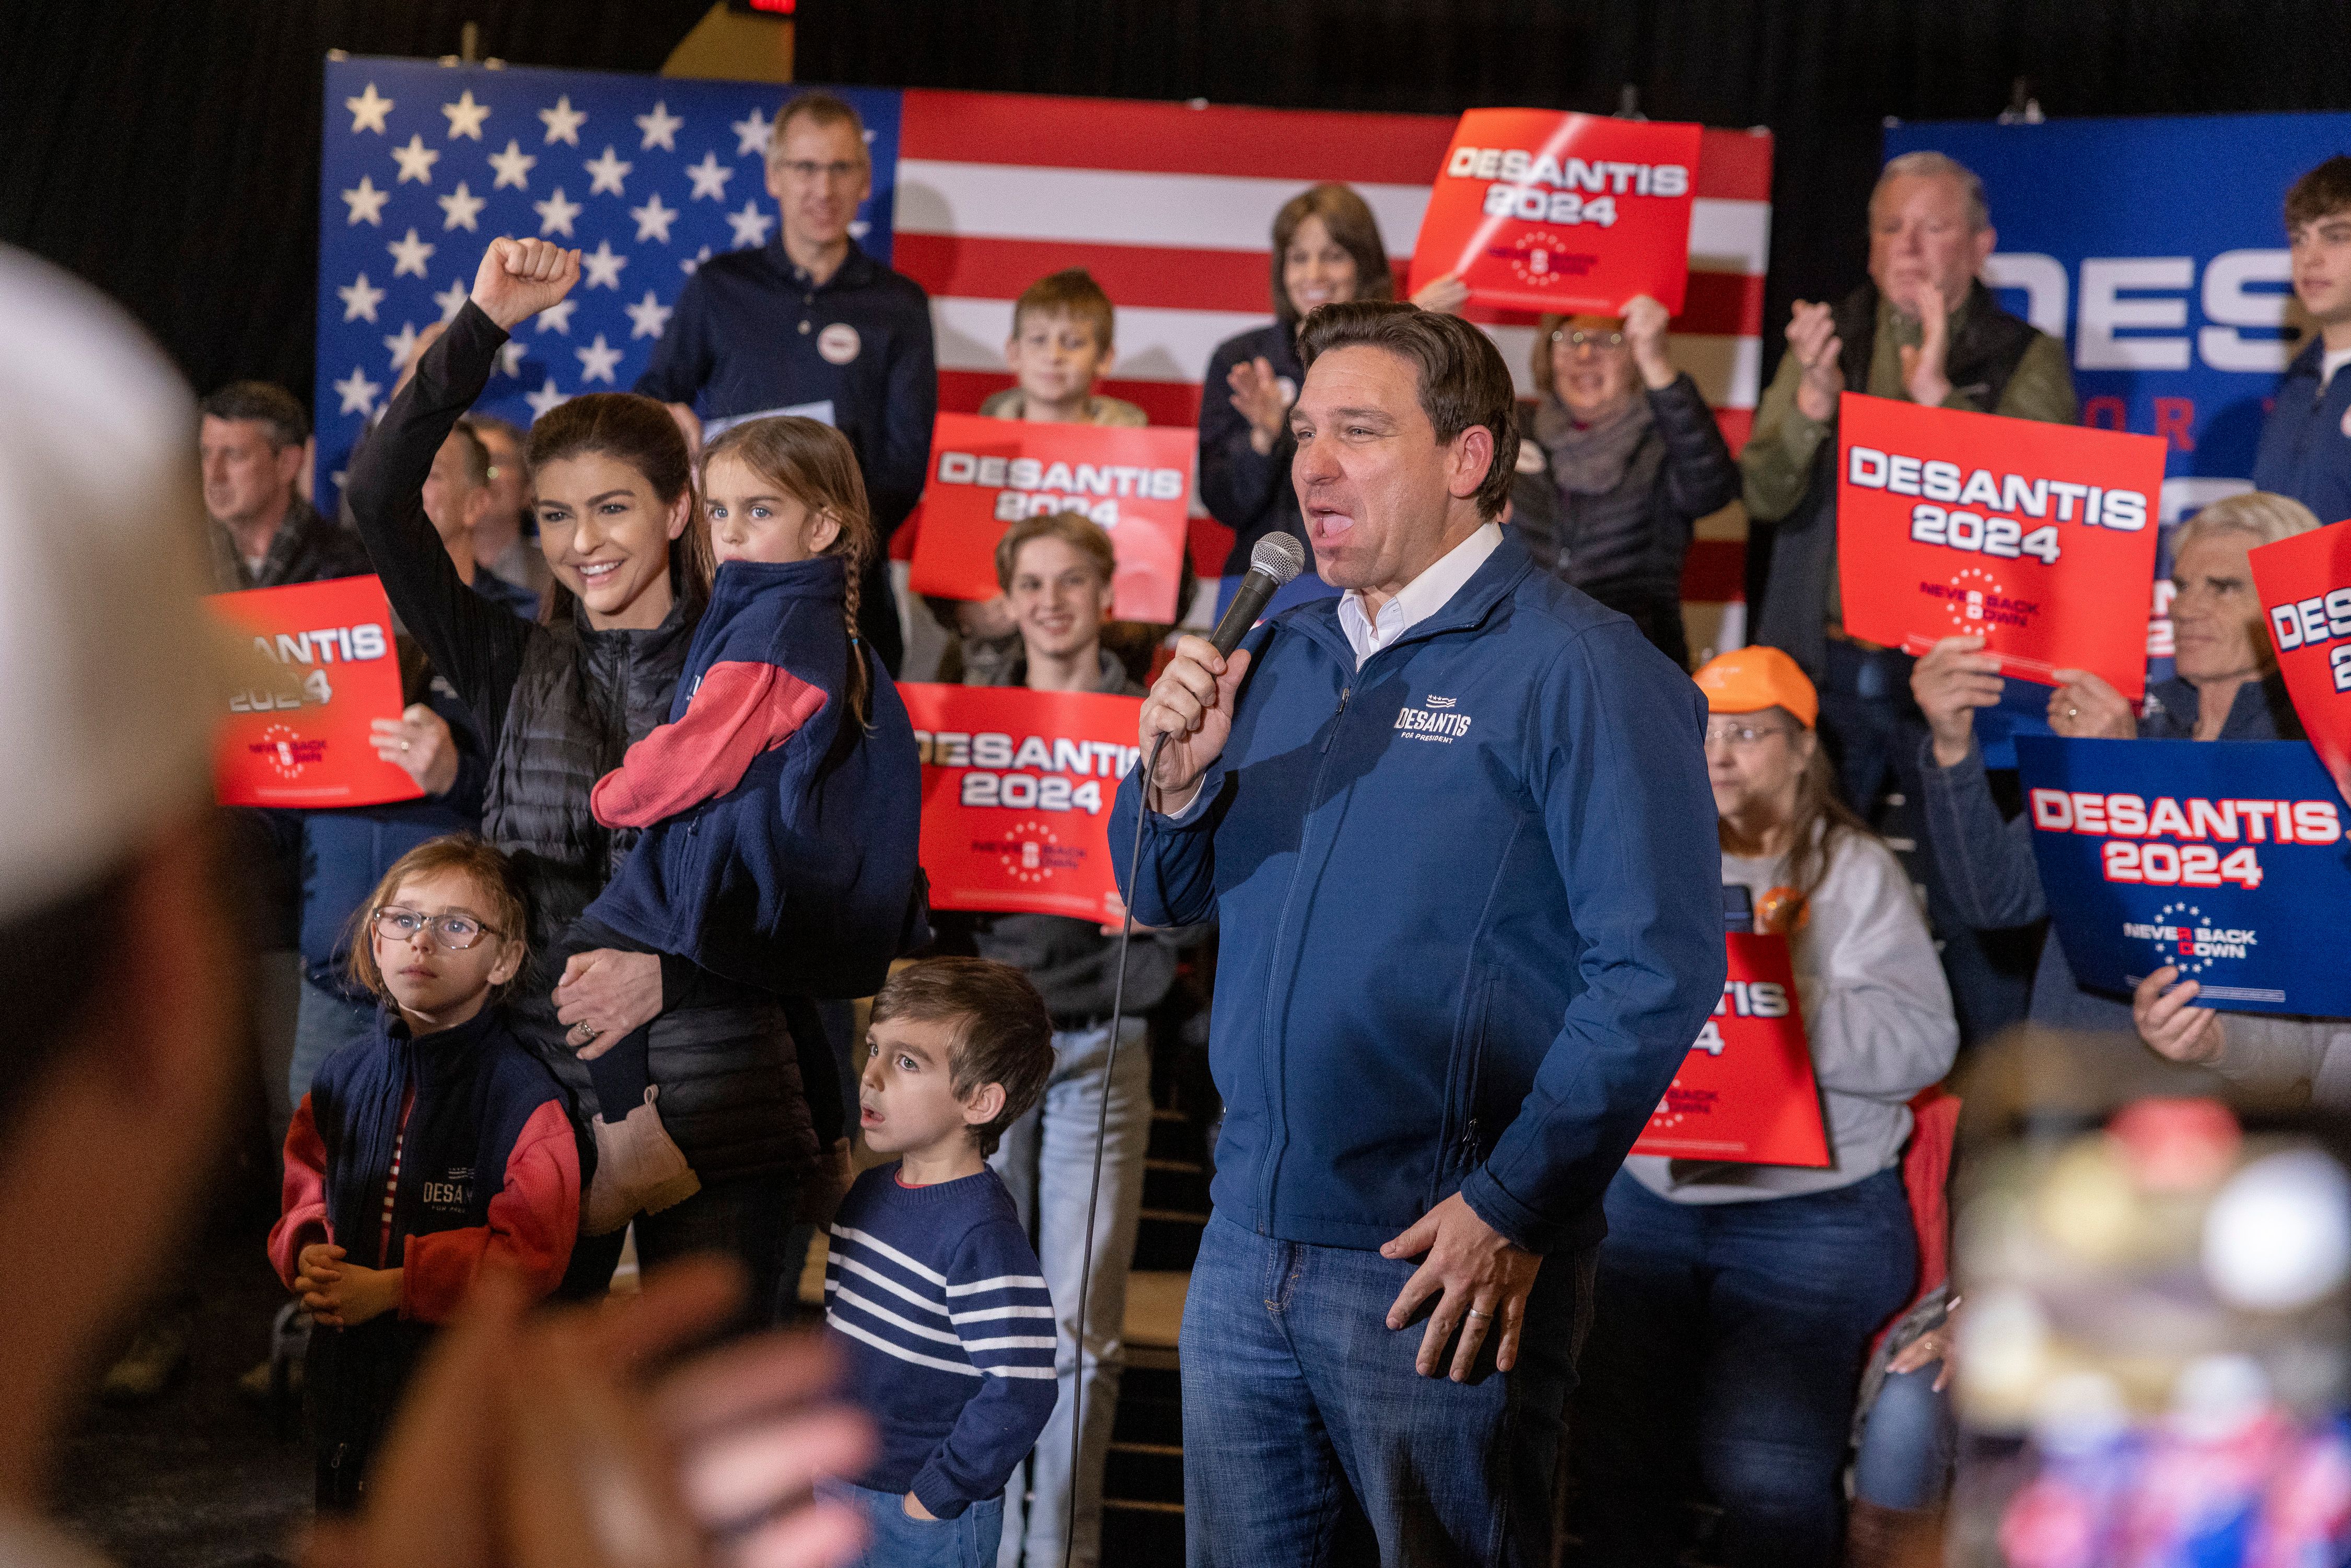  Ron DeSantis, governor of Florida and 2024 Republican presidential candidate, center, during a campaign event at The District Venue in Ankeny, Iowa, US, on Sunday, Jan. 14, 2024. 